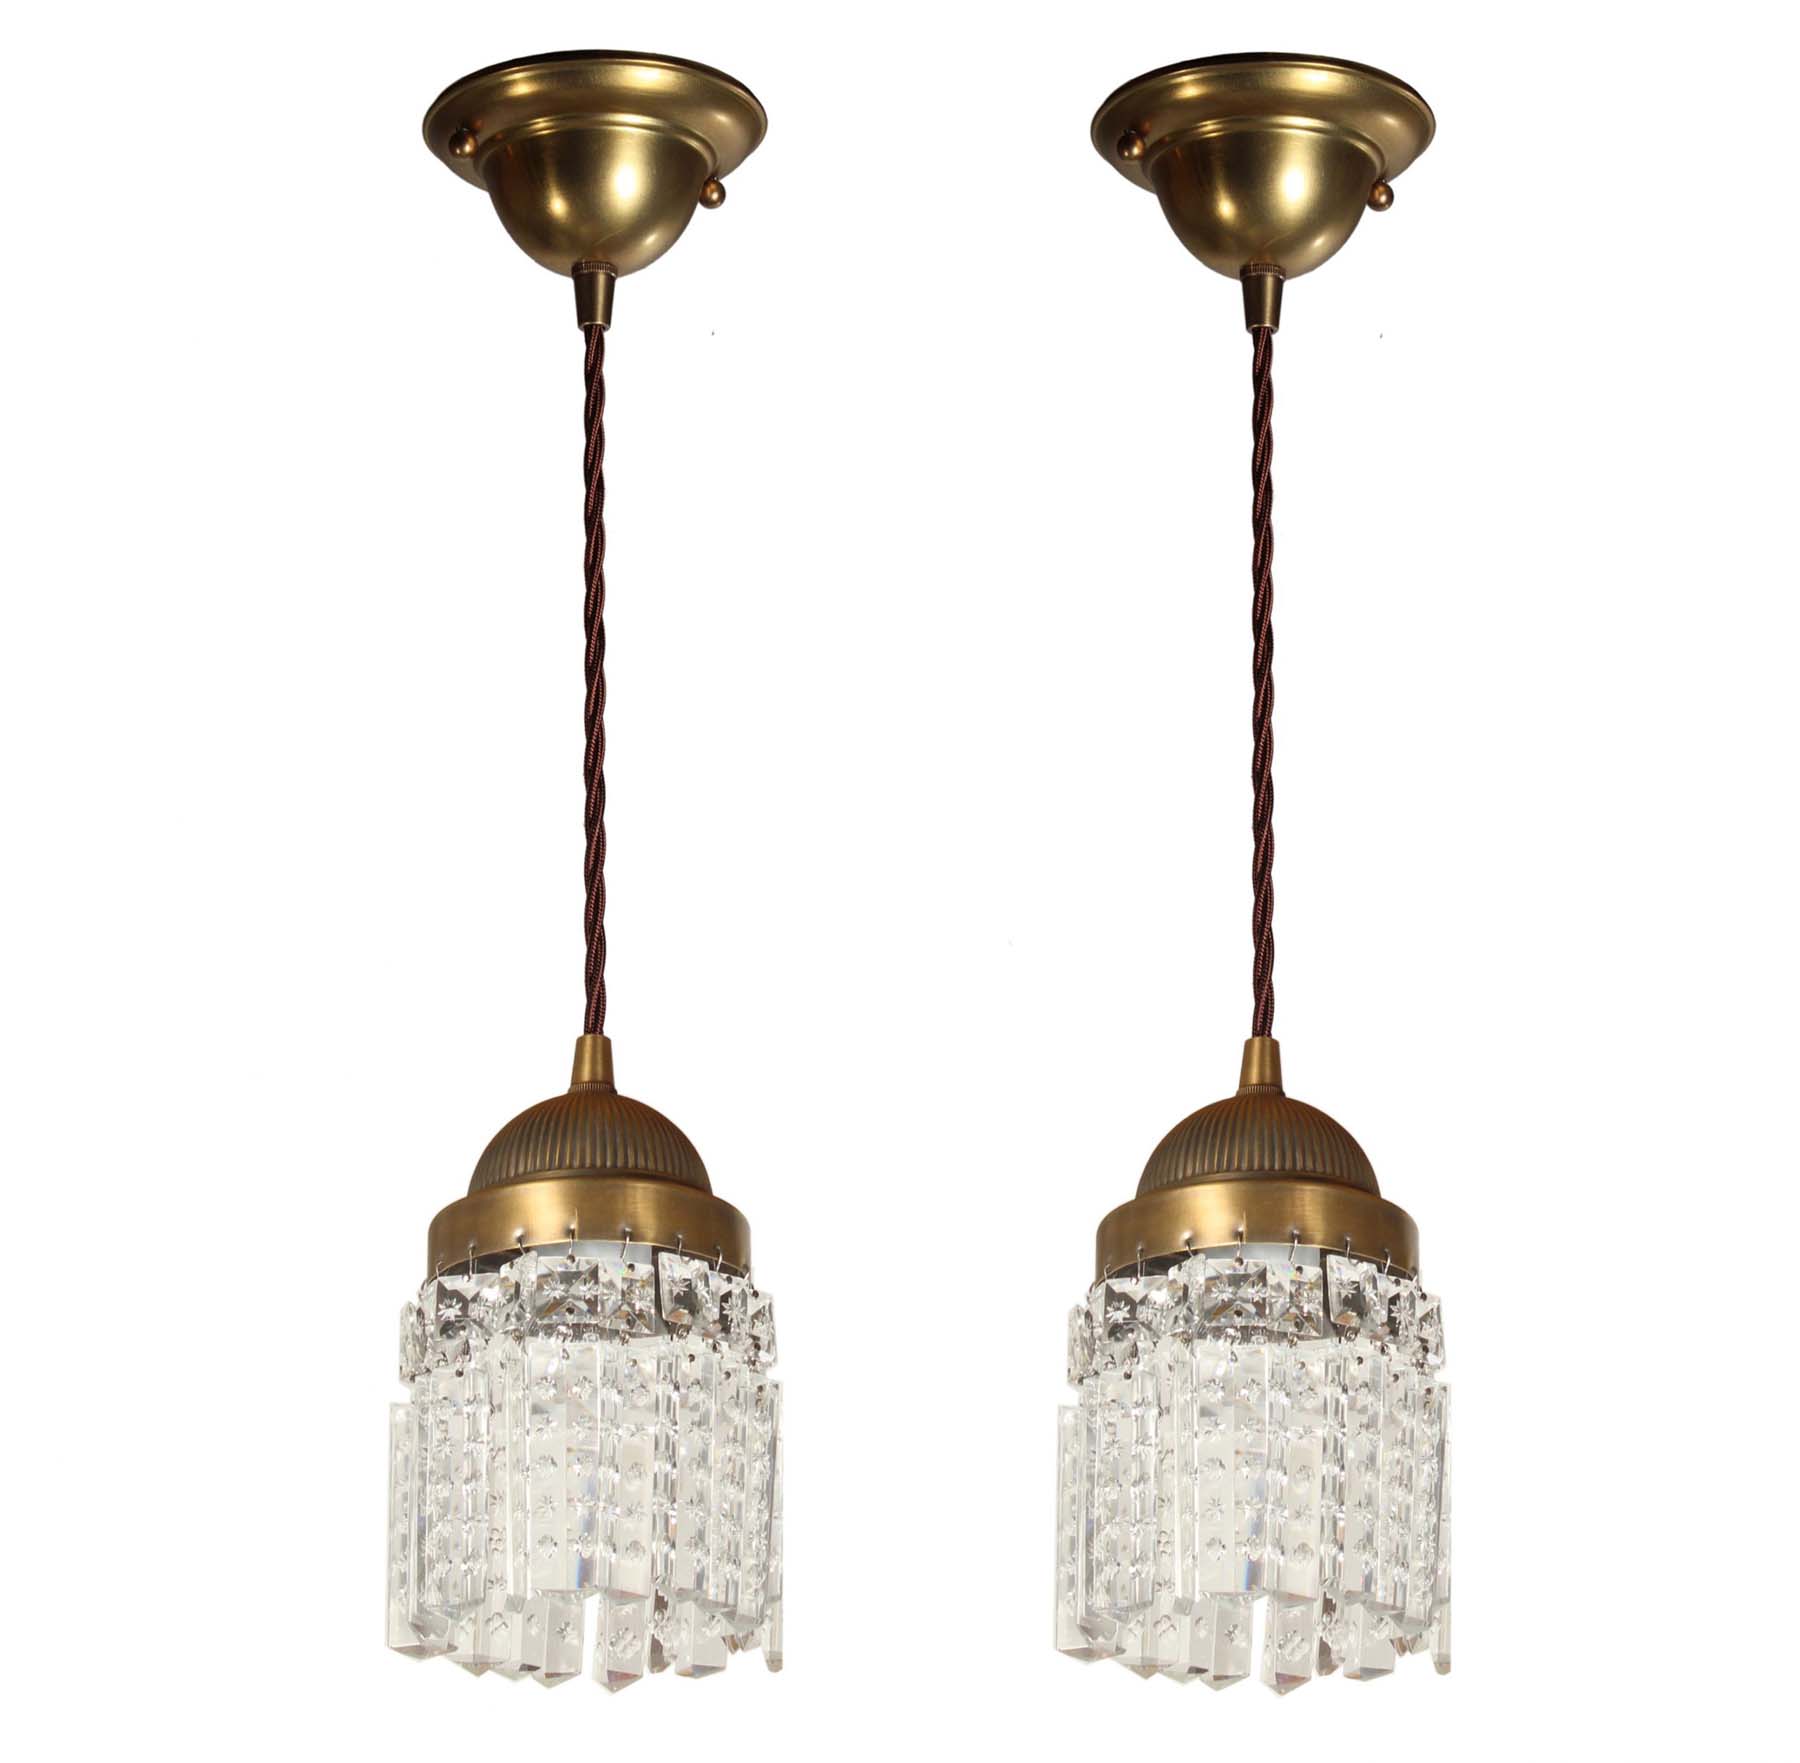 SOLD Antique Brass Pendant Lights with Prisms, c. 1915-0